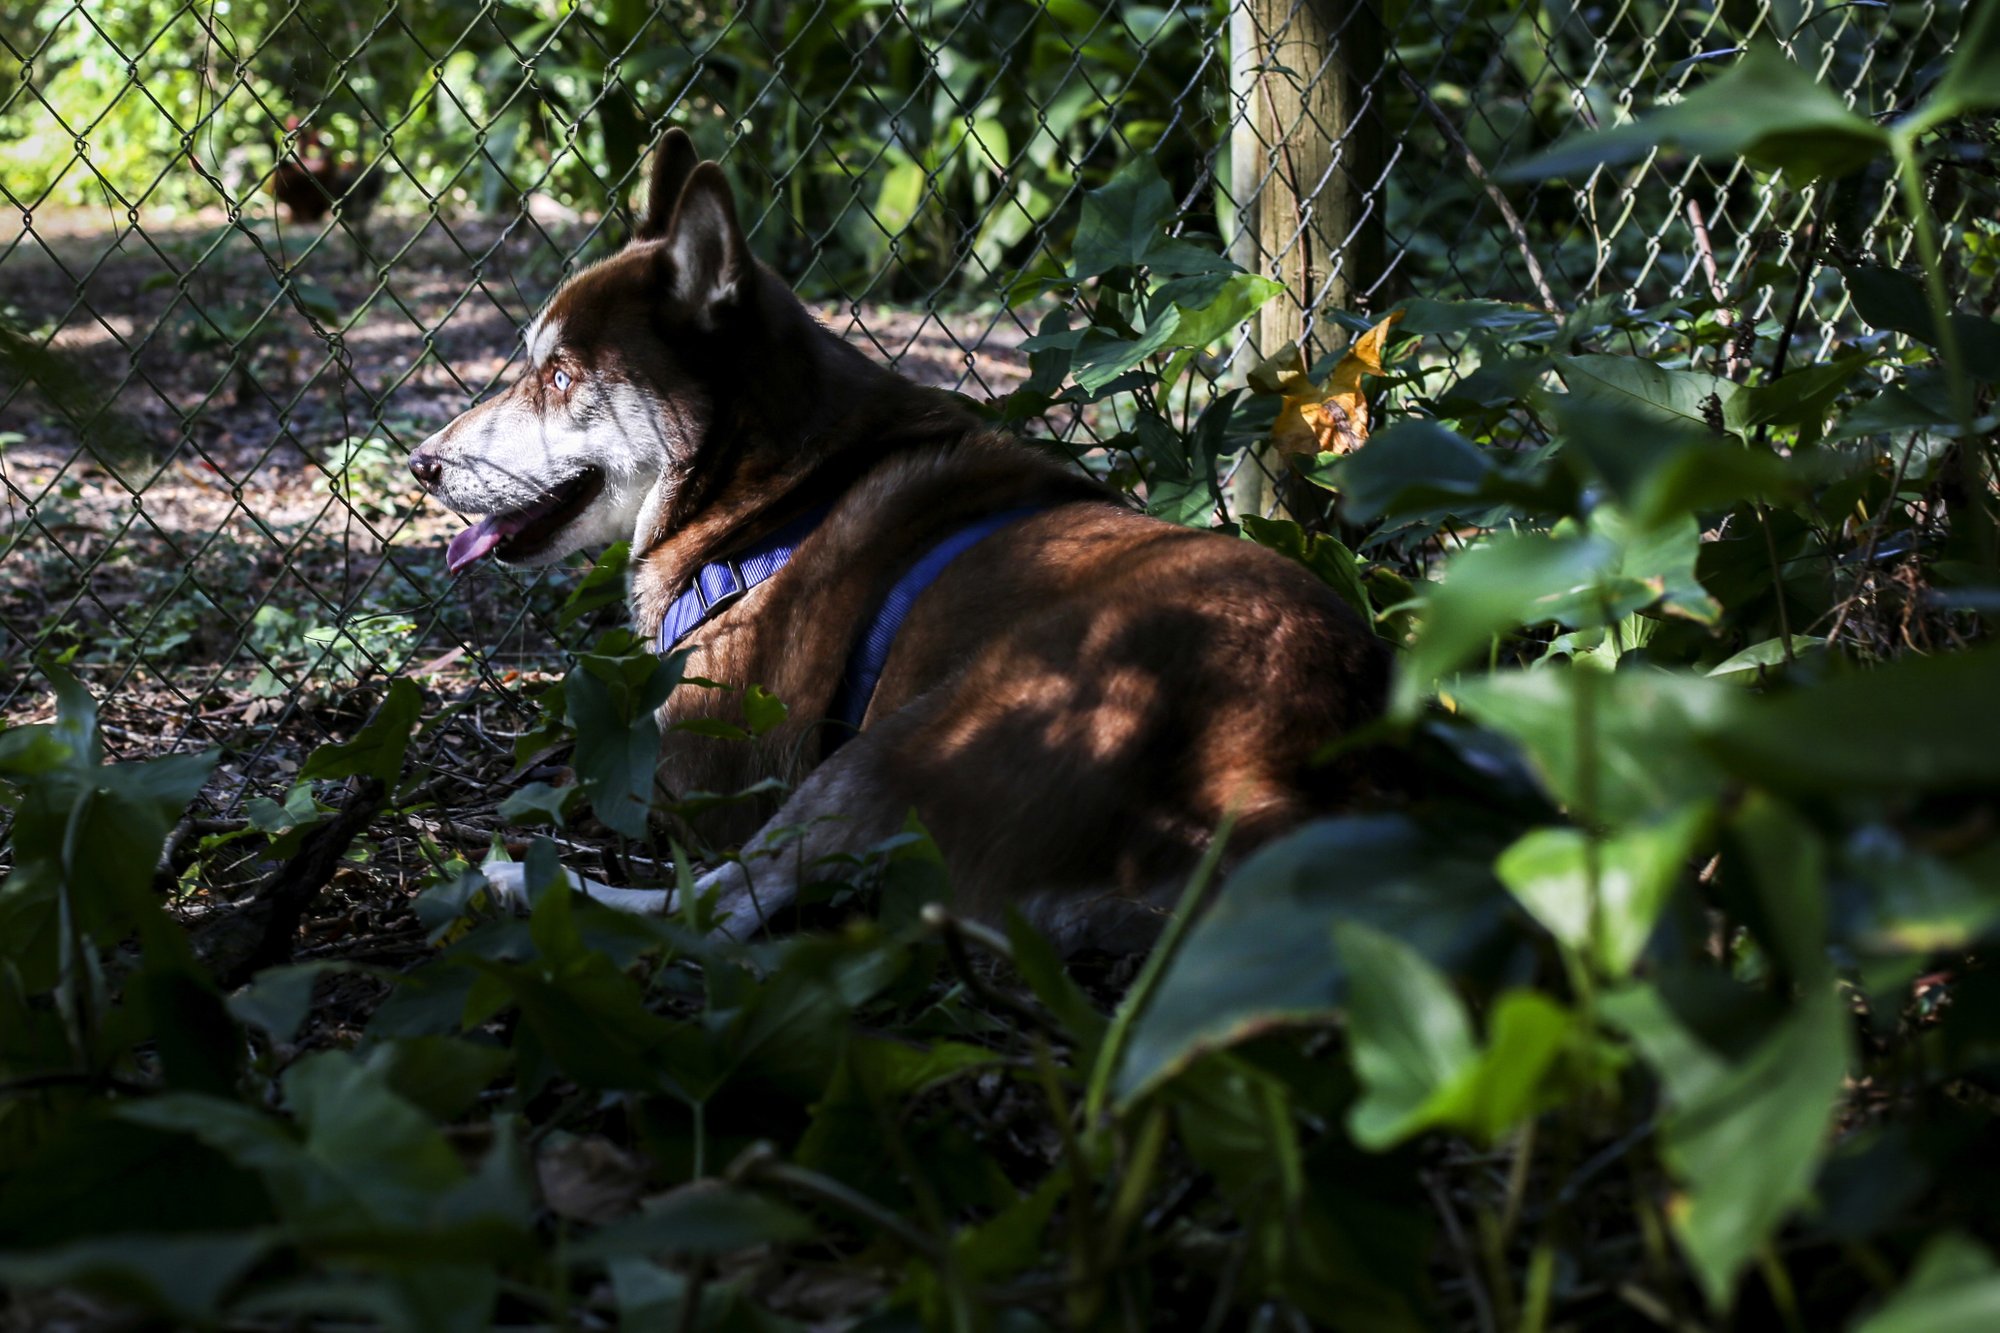 In this Wednesday, Nov. 21, 2018 photo, Sinatra, a brown and white Husky, rests in the yard of the Verrill family at their home in Seffner, Fla. Eighteen months after the dog disappeared from his home in New York, he ended up wandering in a Florida neighborhood where 13-year-old Verrill took him in. Turns out, Sinatra once belonged to Zion Willis, 16, who died in a gun accident in Brooklyn, N.Y., in 2015. He'll be reunited with her family in Baltimore on Sunday. [Photo: AP/ Bronte Wittpenn/ Tampa Bay Times]